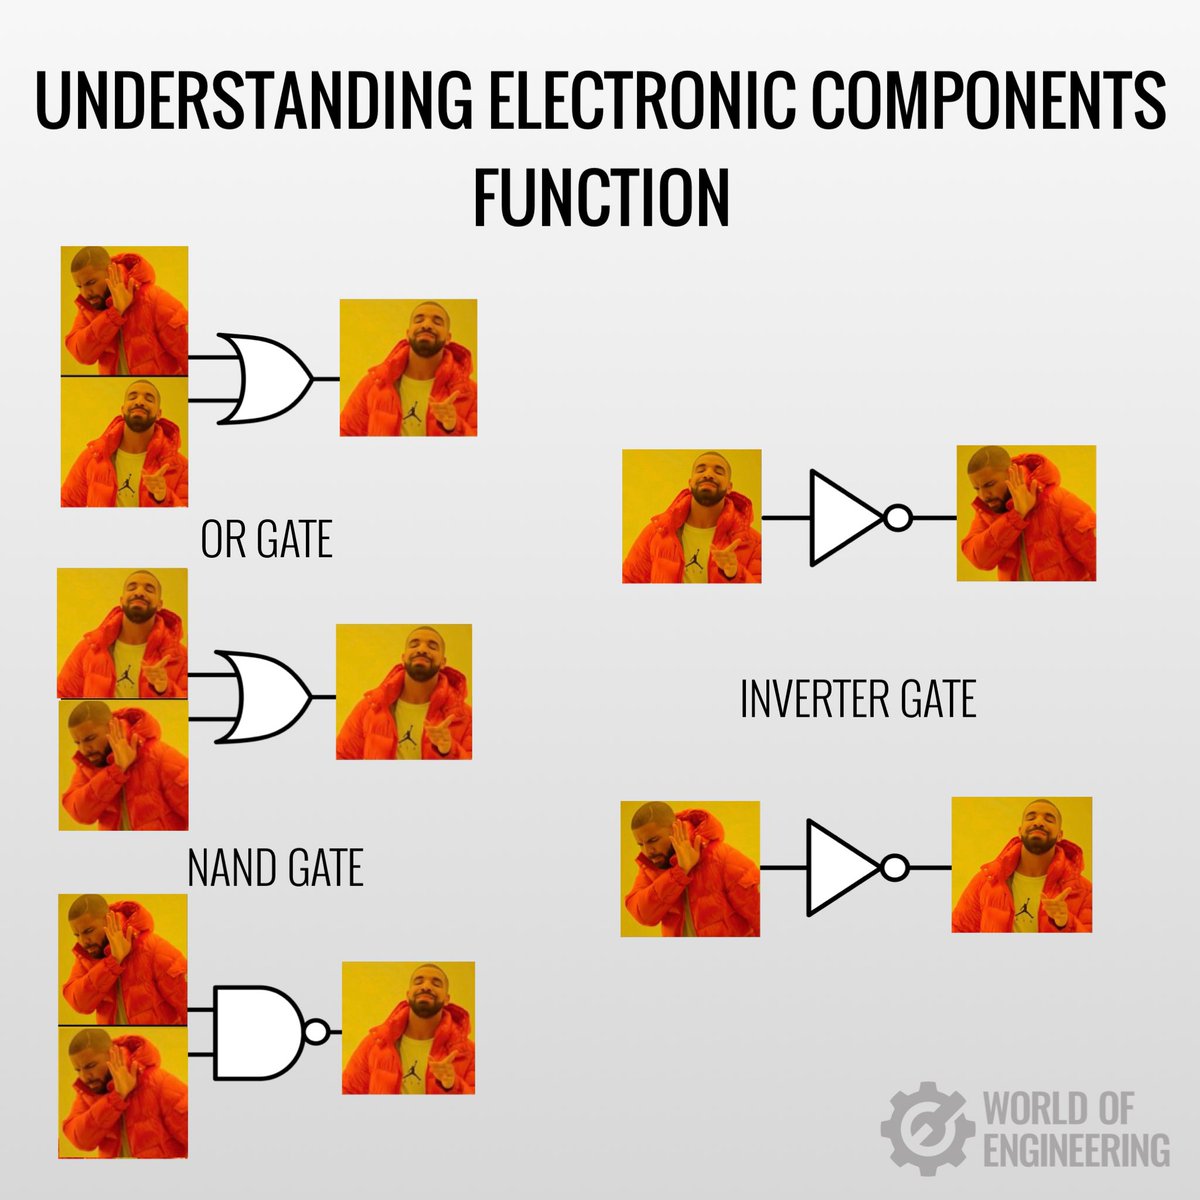 Understanding electronic components function.